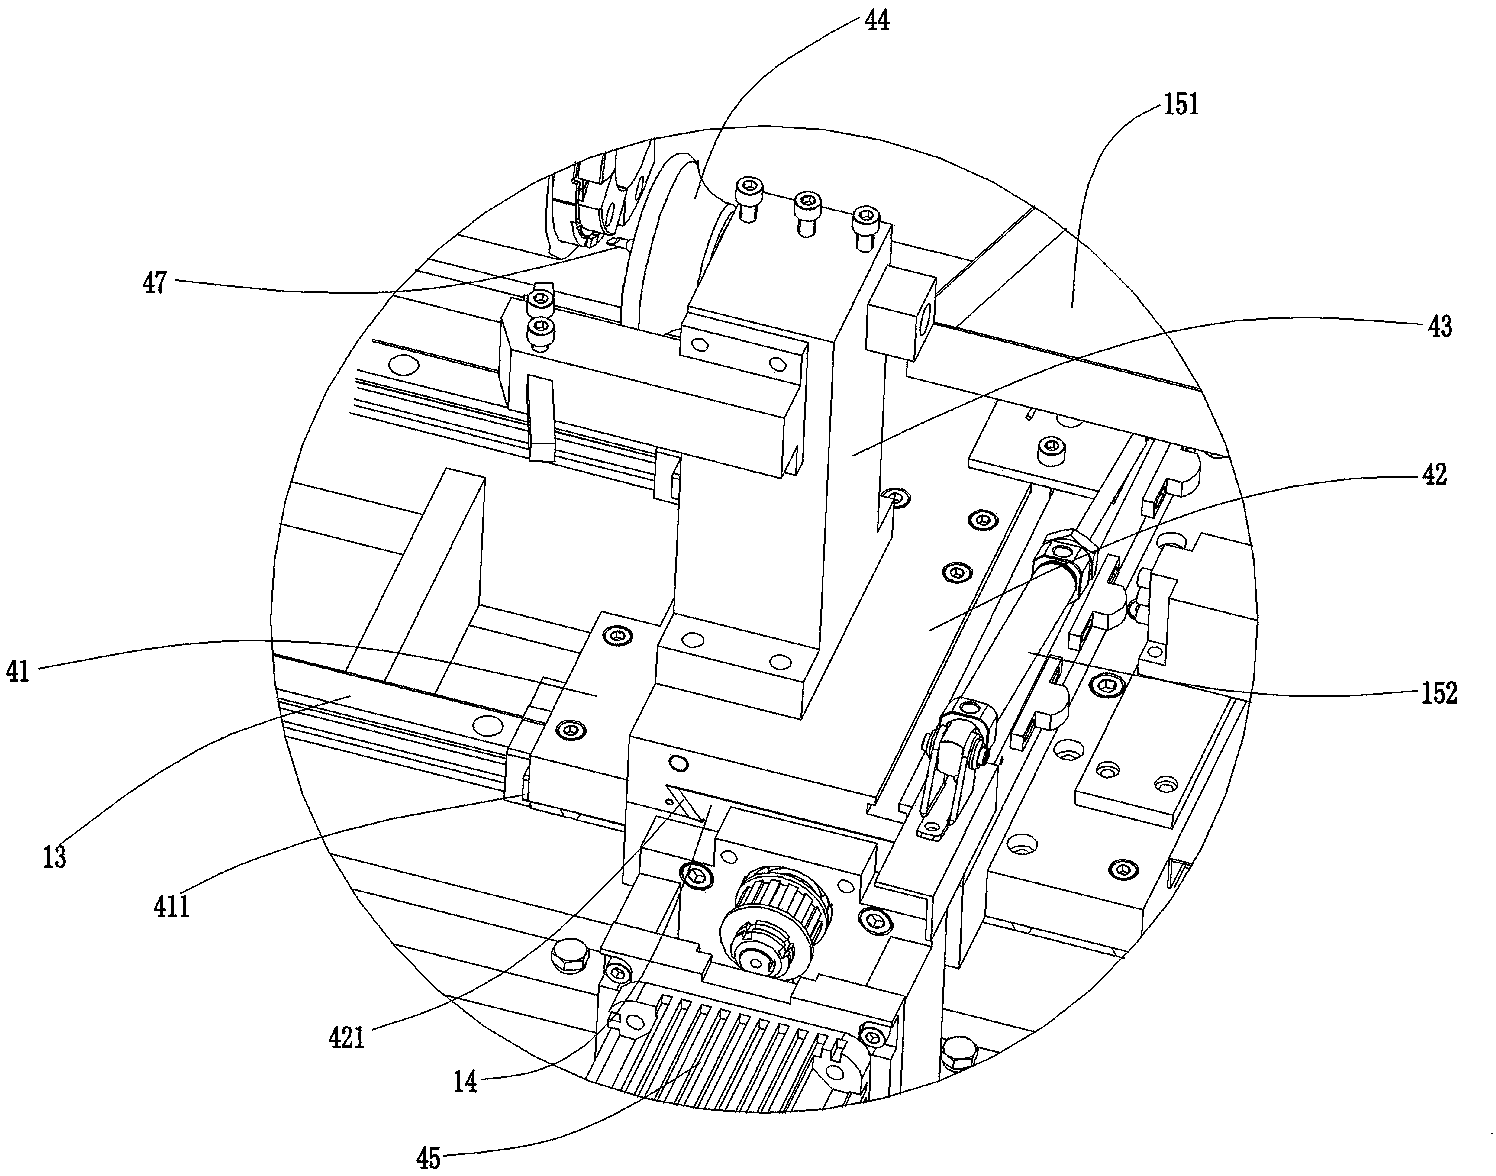 Spinning machine with automatic feeding and discharging function